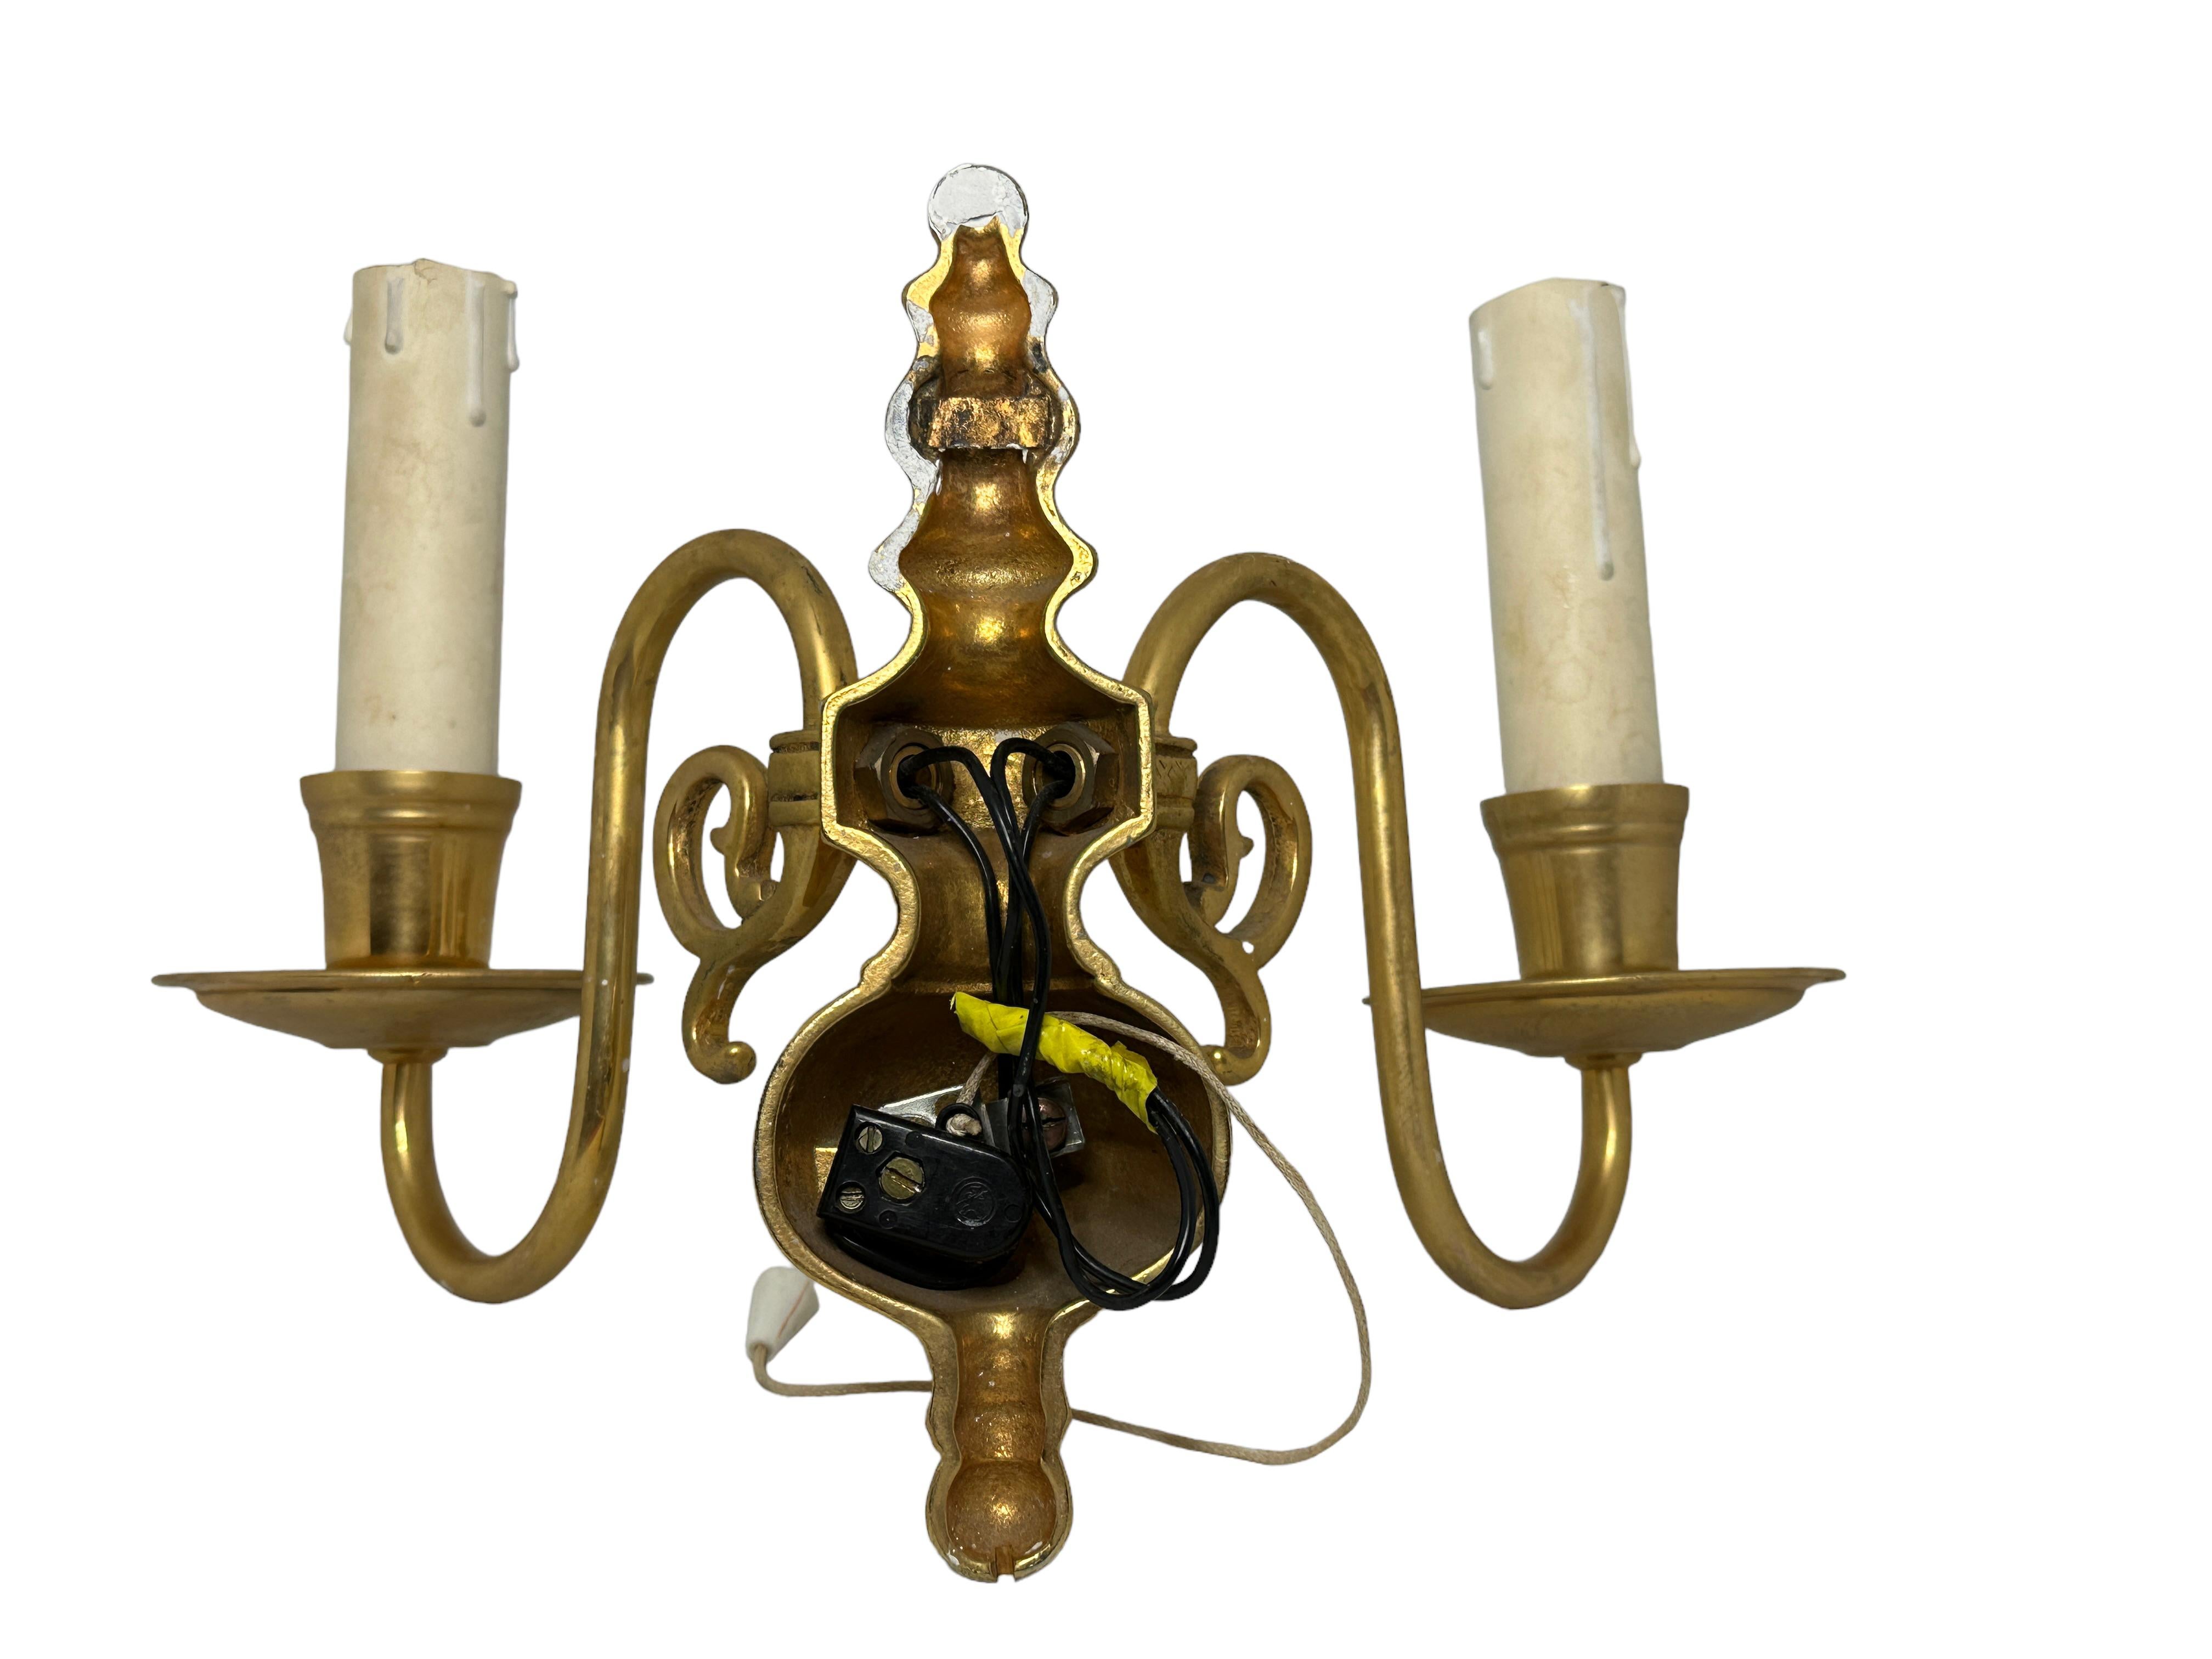 Mid-20th Century Pair of Solid Brass Two-Light Wall Sconces, Vintage, Austria, 1950s For Sale